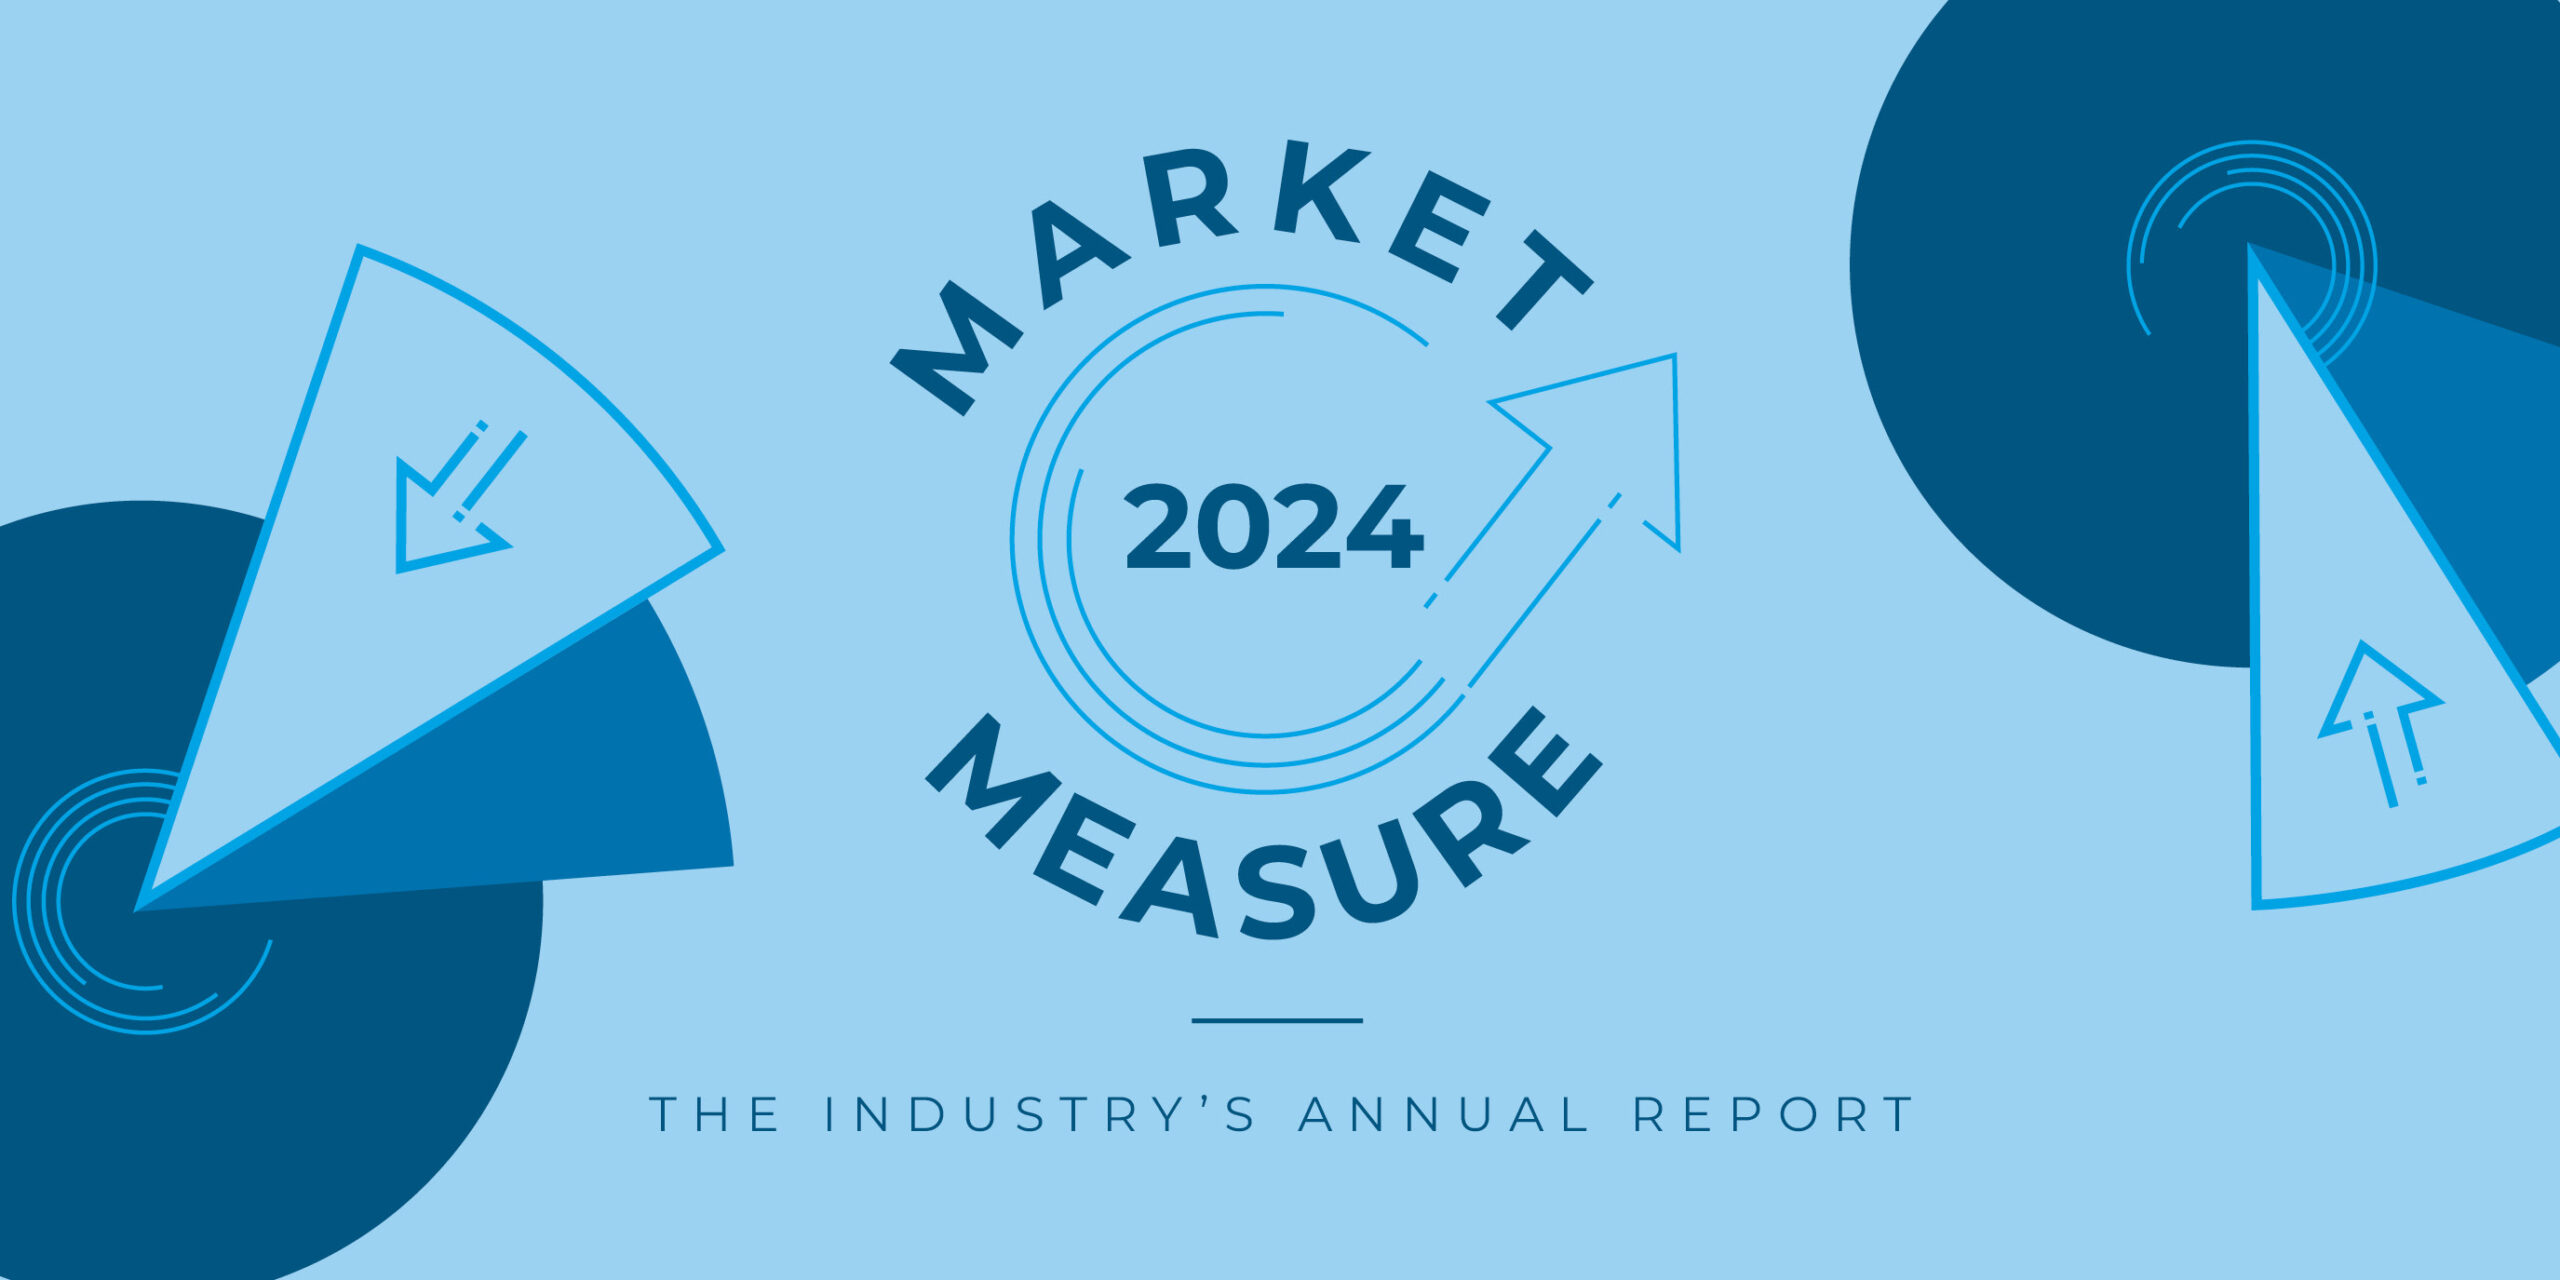 Market Measure 2024 The Industry’s Annual Report Paint & Decorating